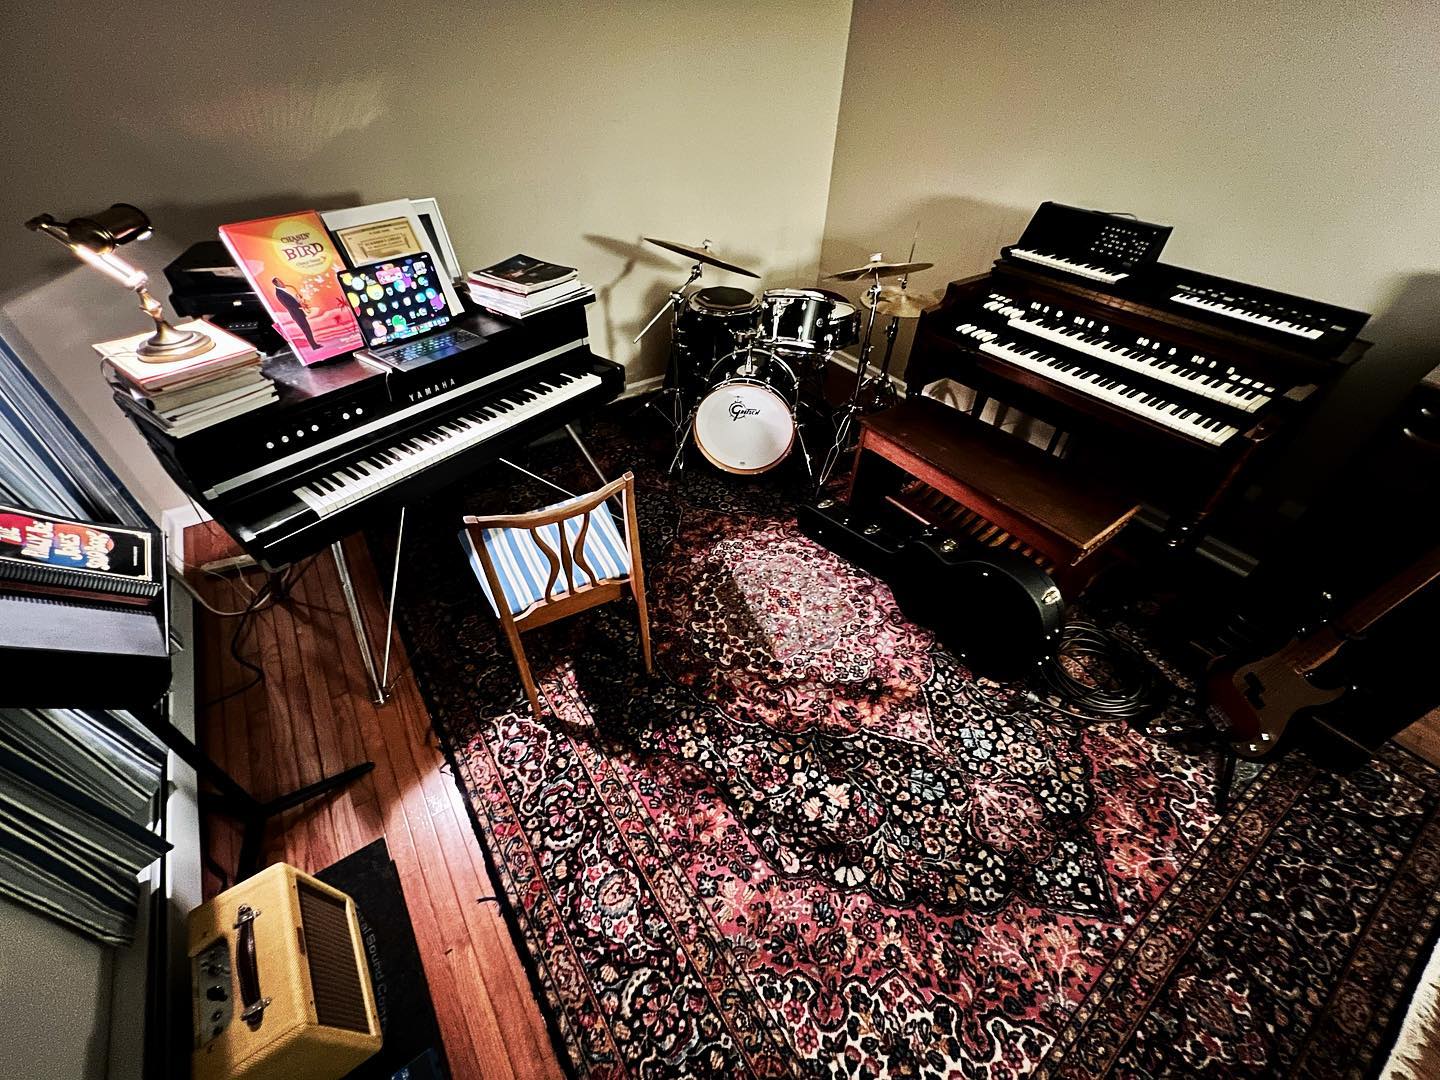 I did some rearranging today, and damn, is that Hammond B3 heavy! The Yamaha CP-70 piano isn’t skinny either.